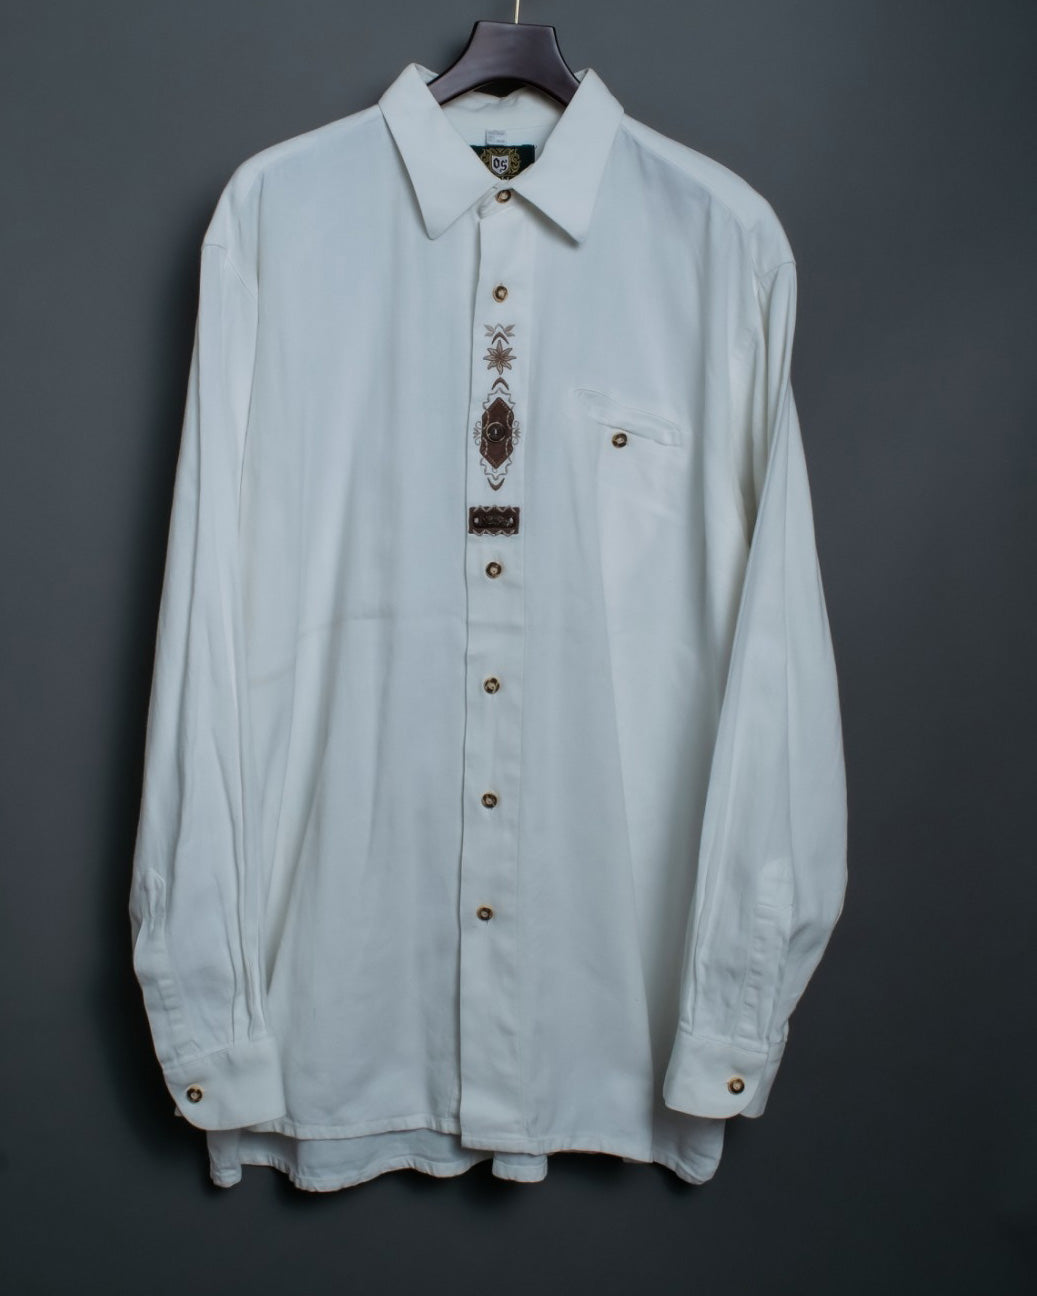 Chewy Fabric Tyrolean Shirt